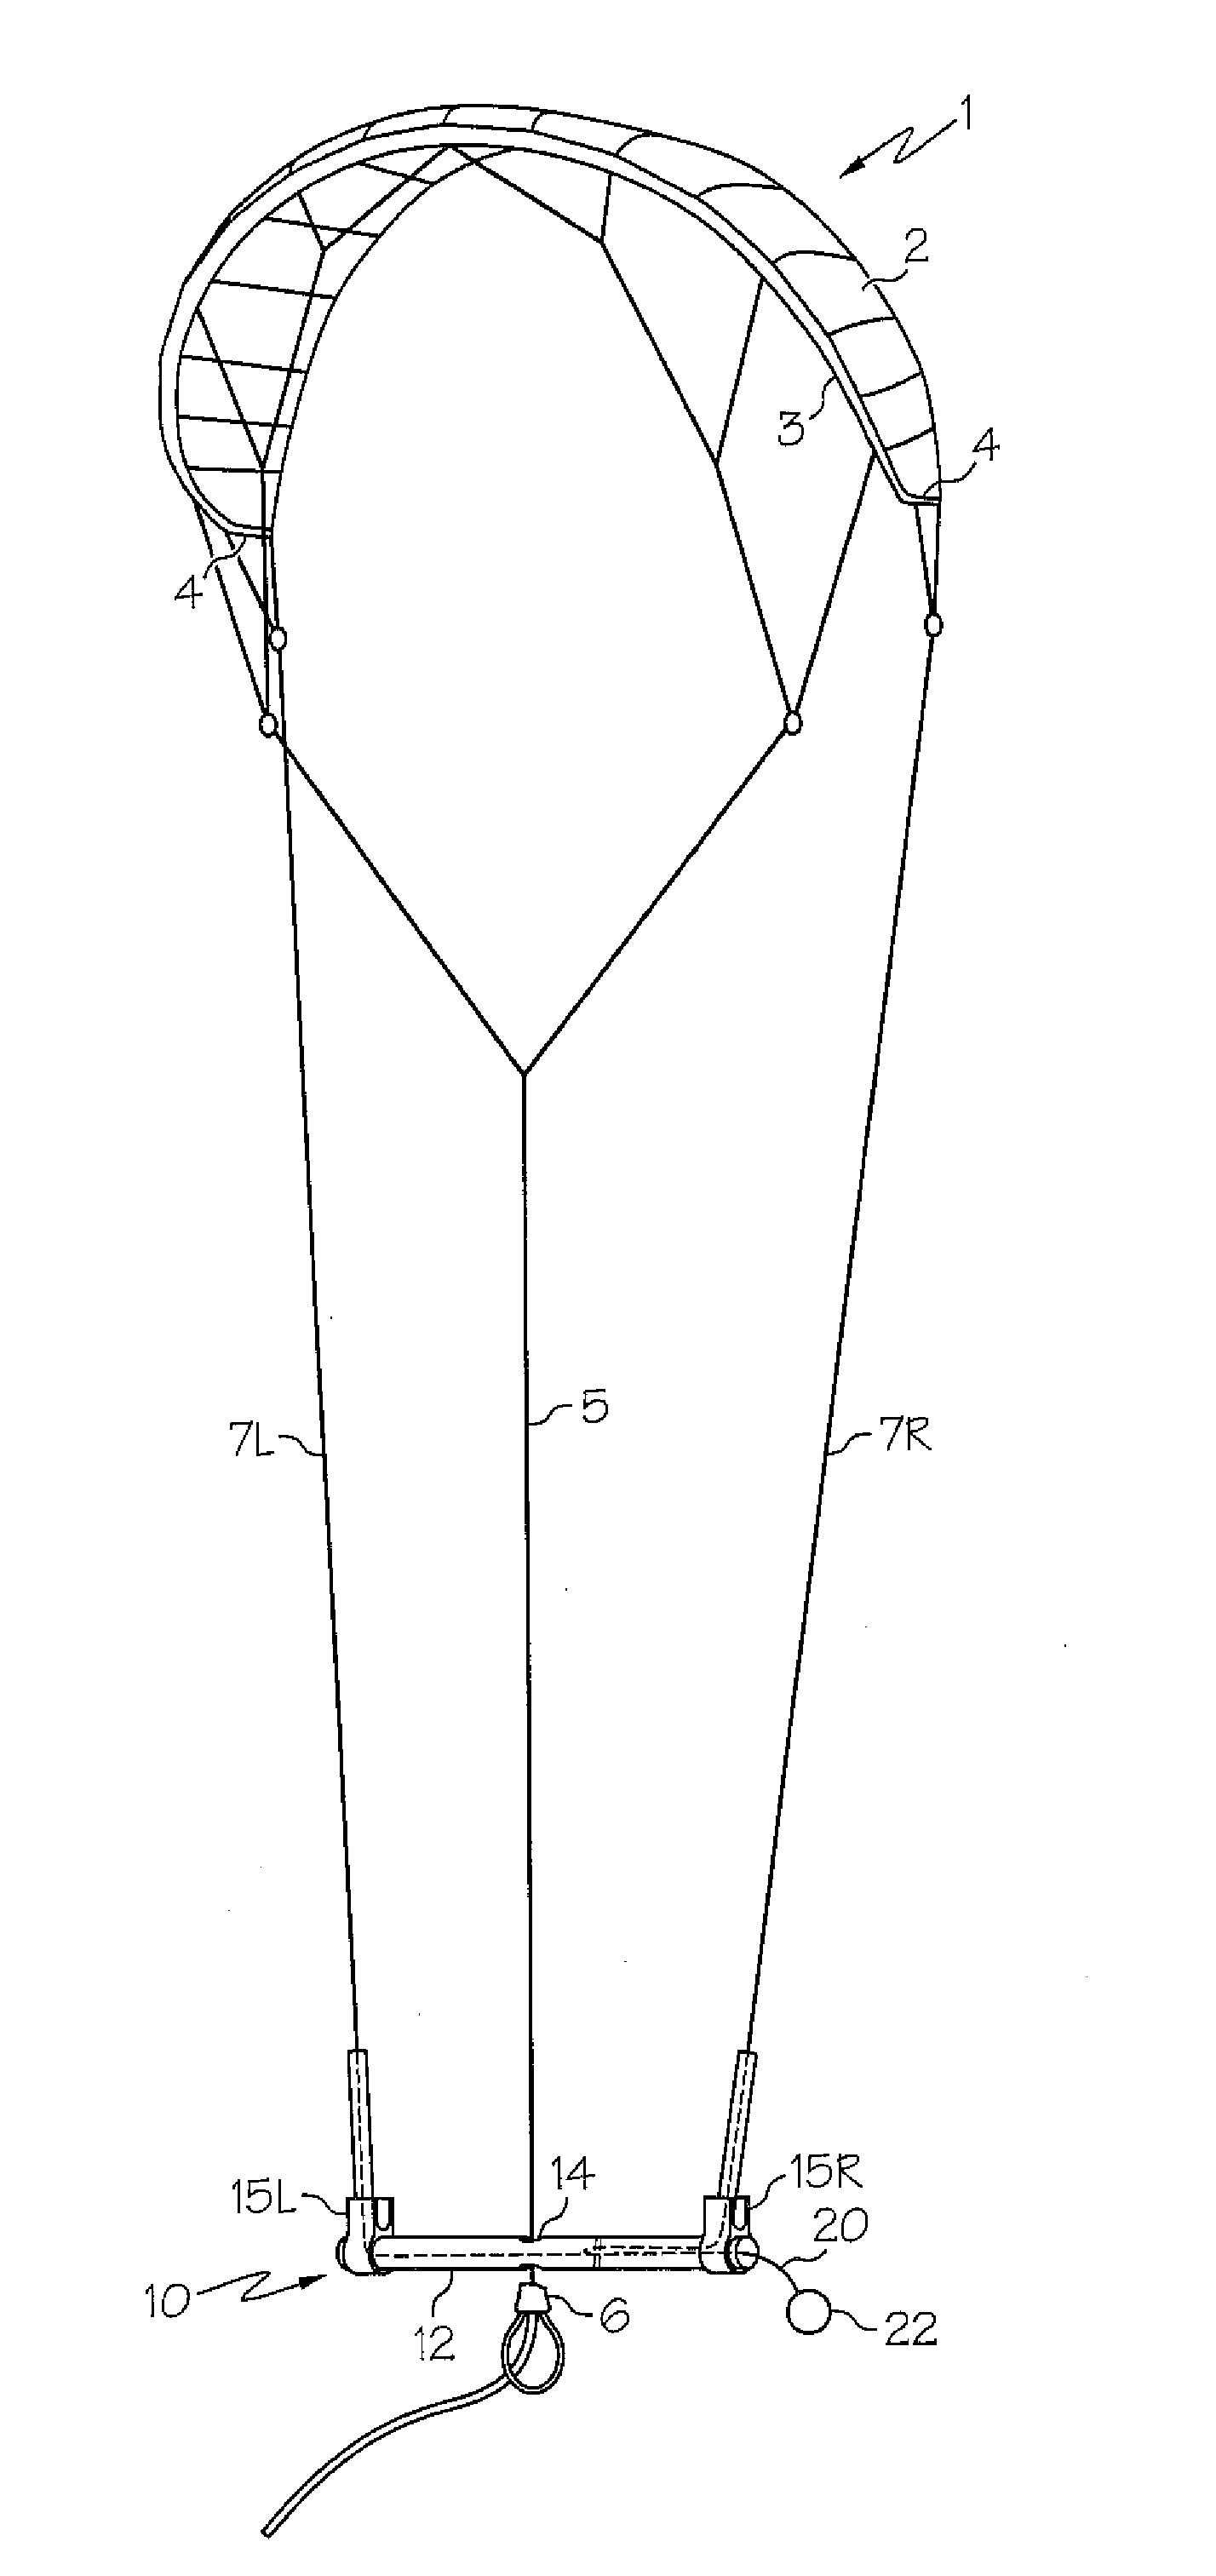 Control bar with outer steering line trim and sheeting system for sport kite